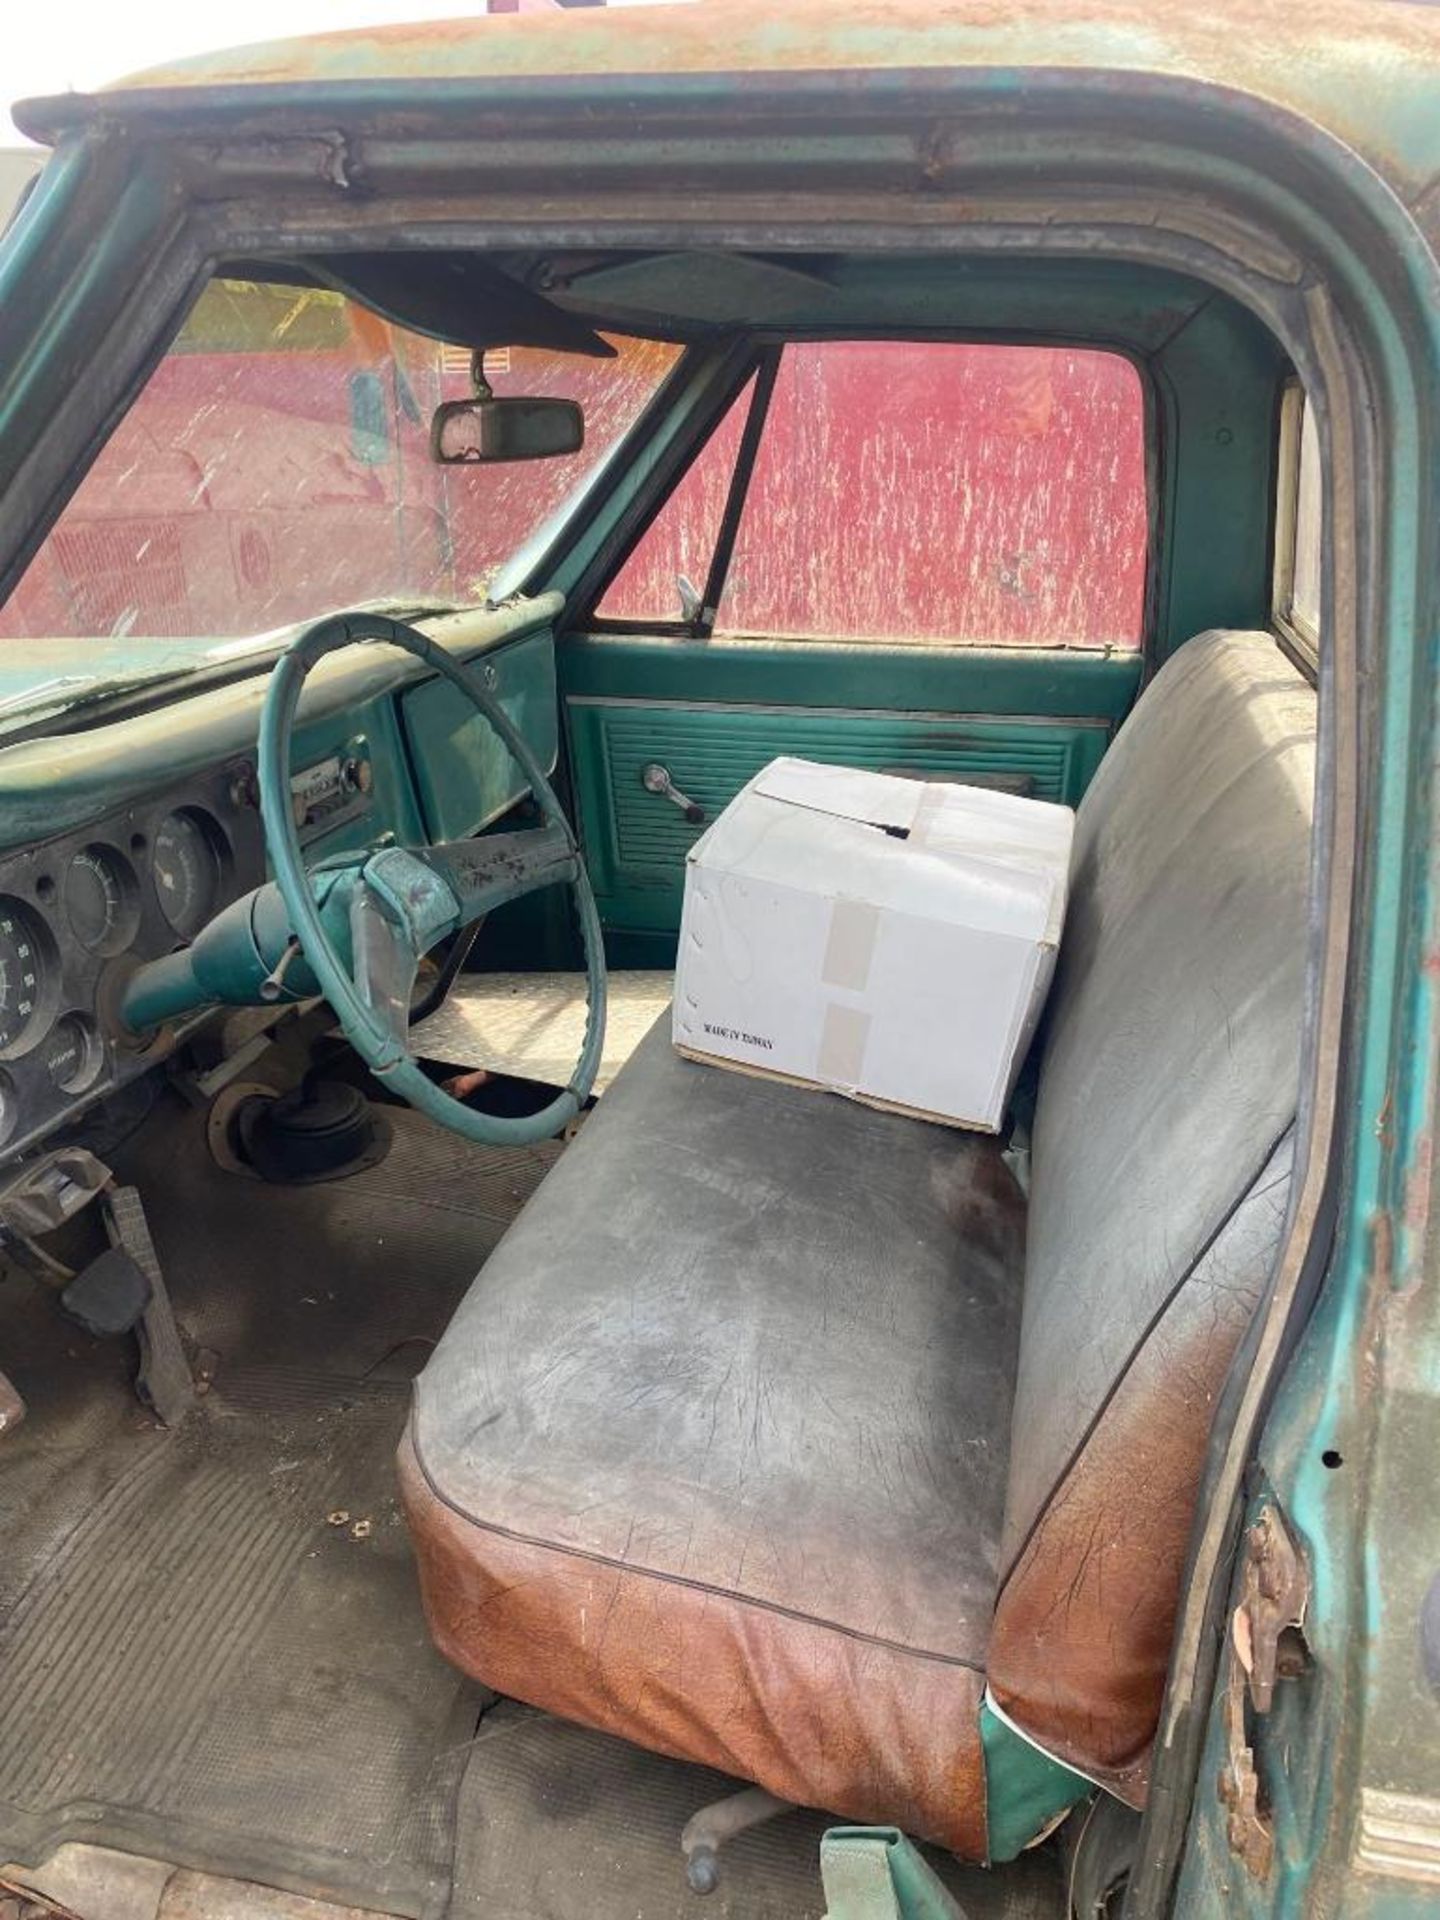 1970 C/10 Pickup Truck (for parts) - Image 6 of 10